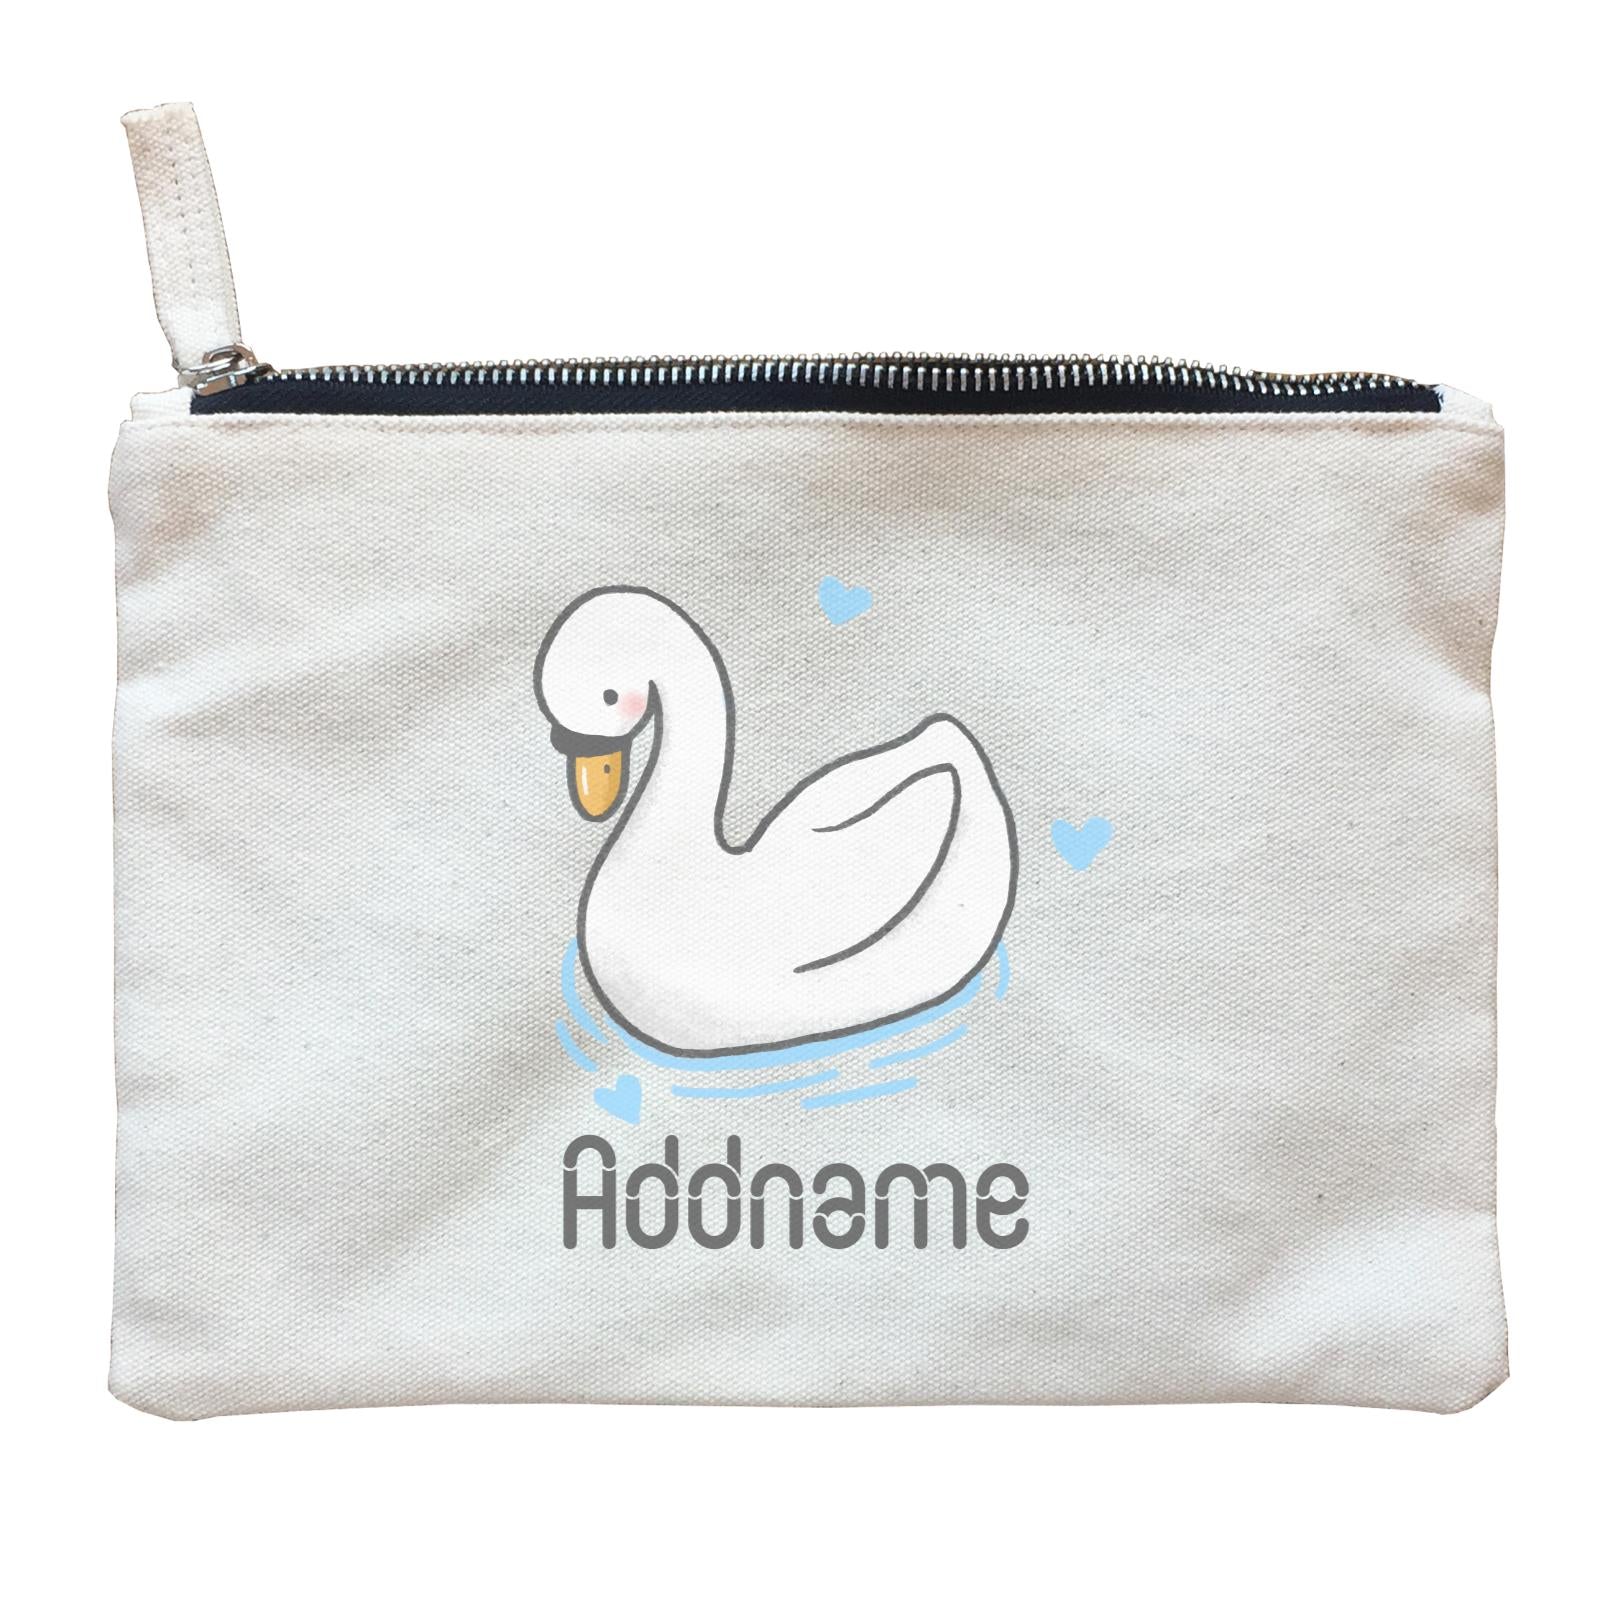 Cute Hand Drawn Style Swan Addname Zipper Pouch